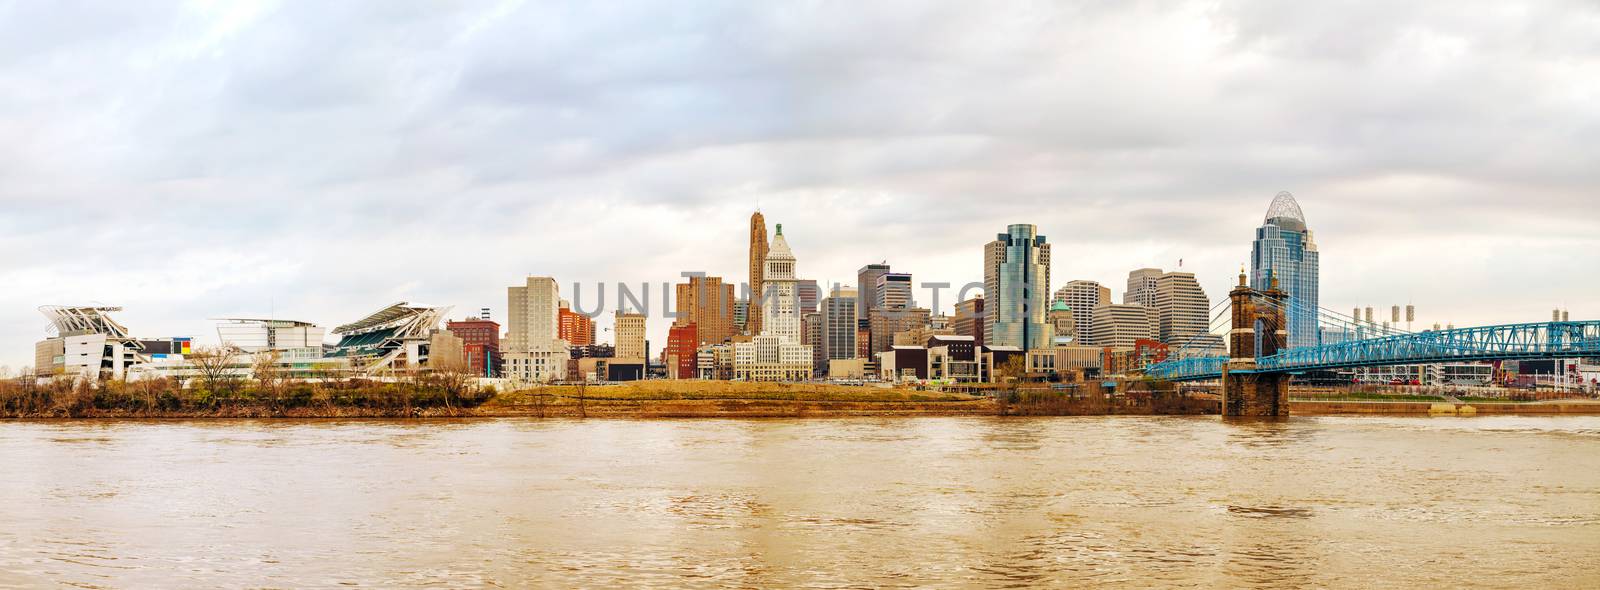 Cincinnati downtown panoramic overview by AndreyKr